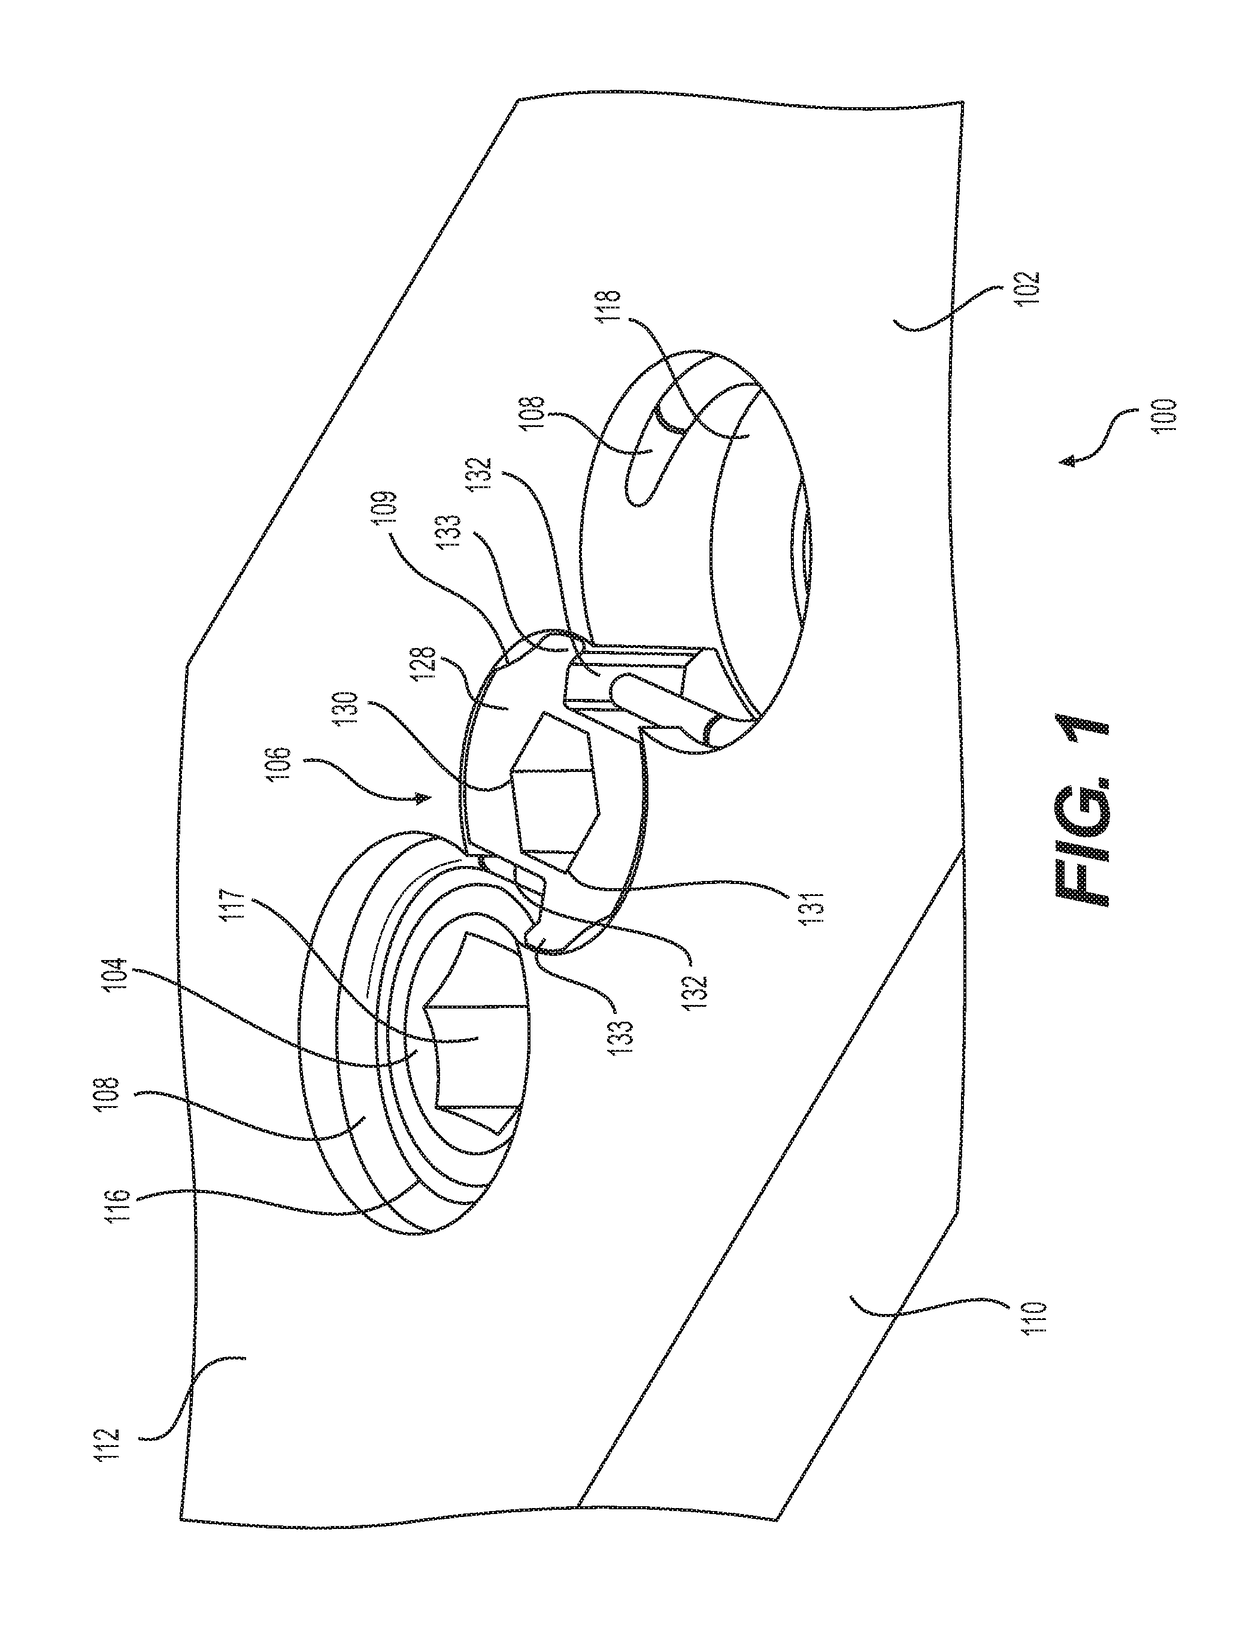 Spinal plate assembly having locking mechanism